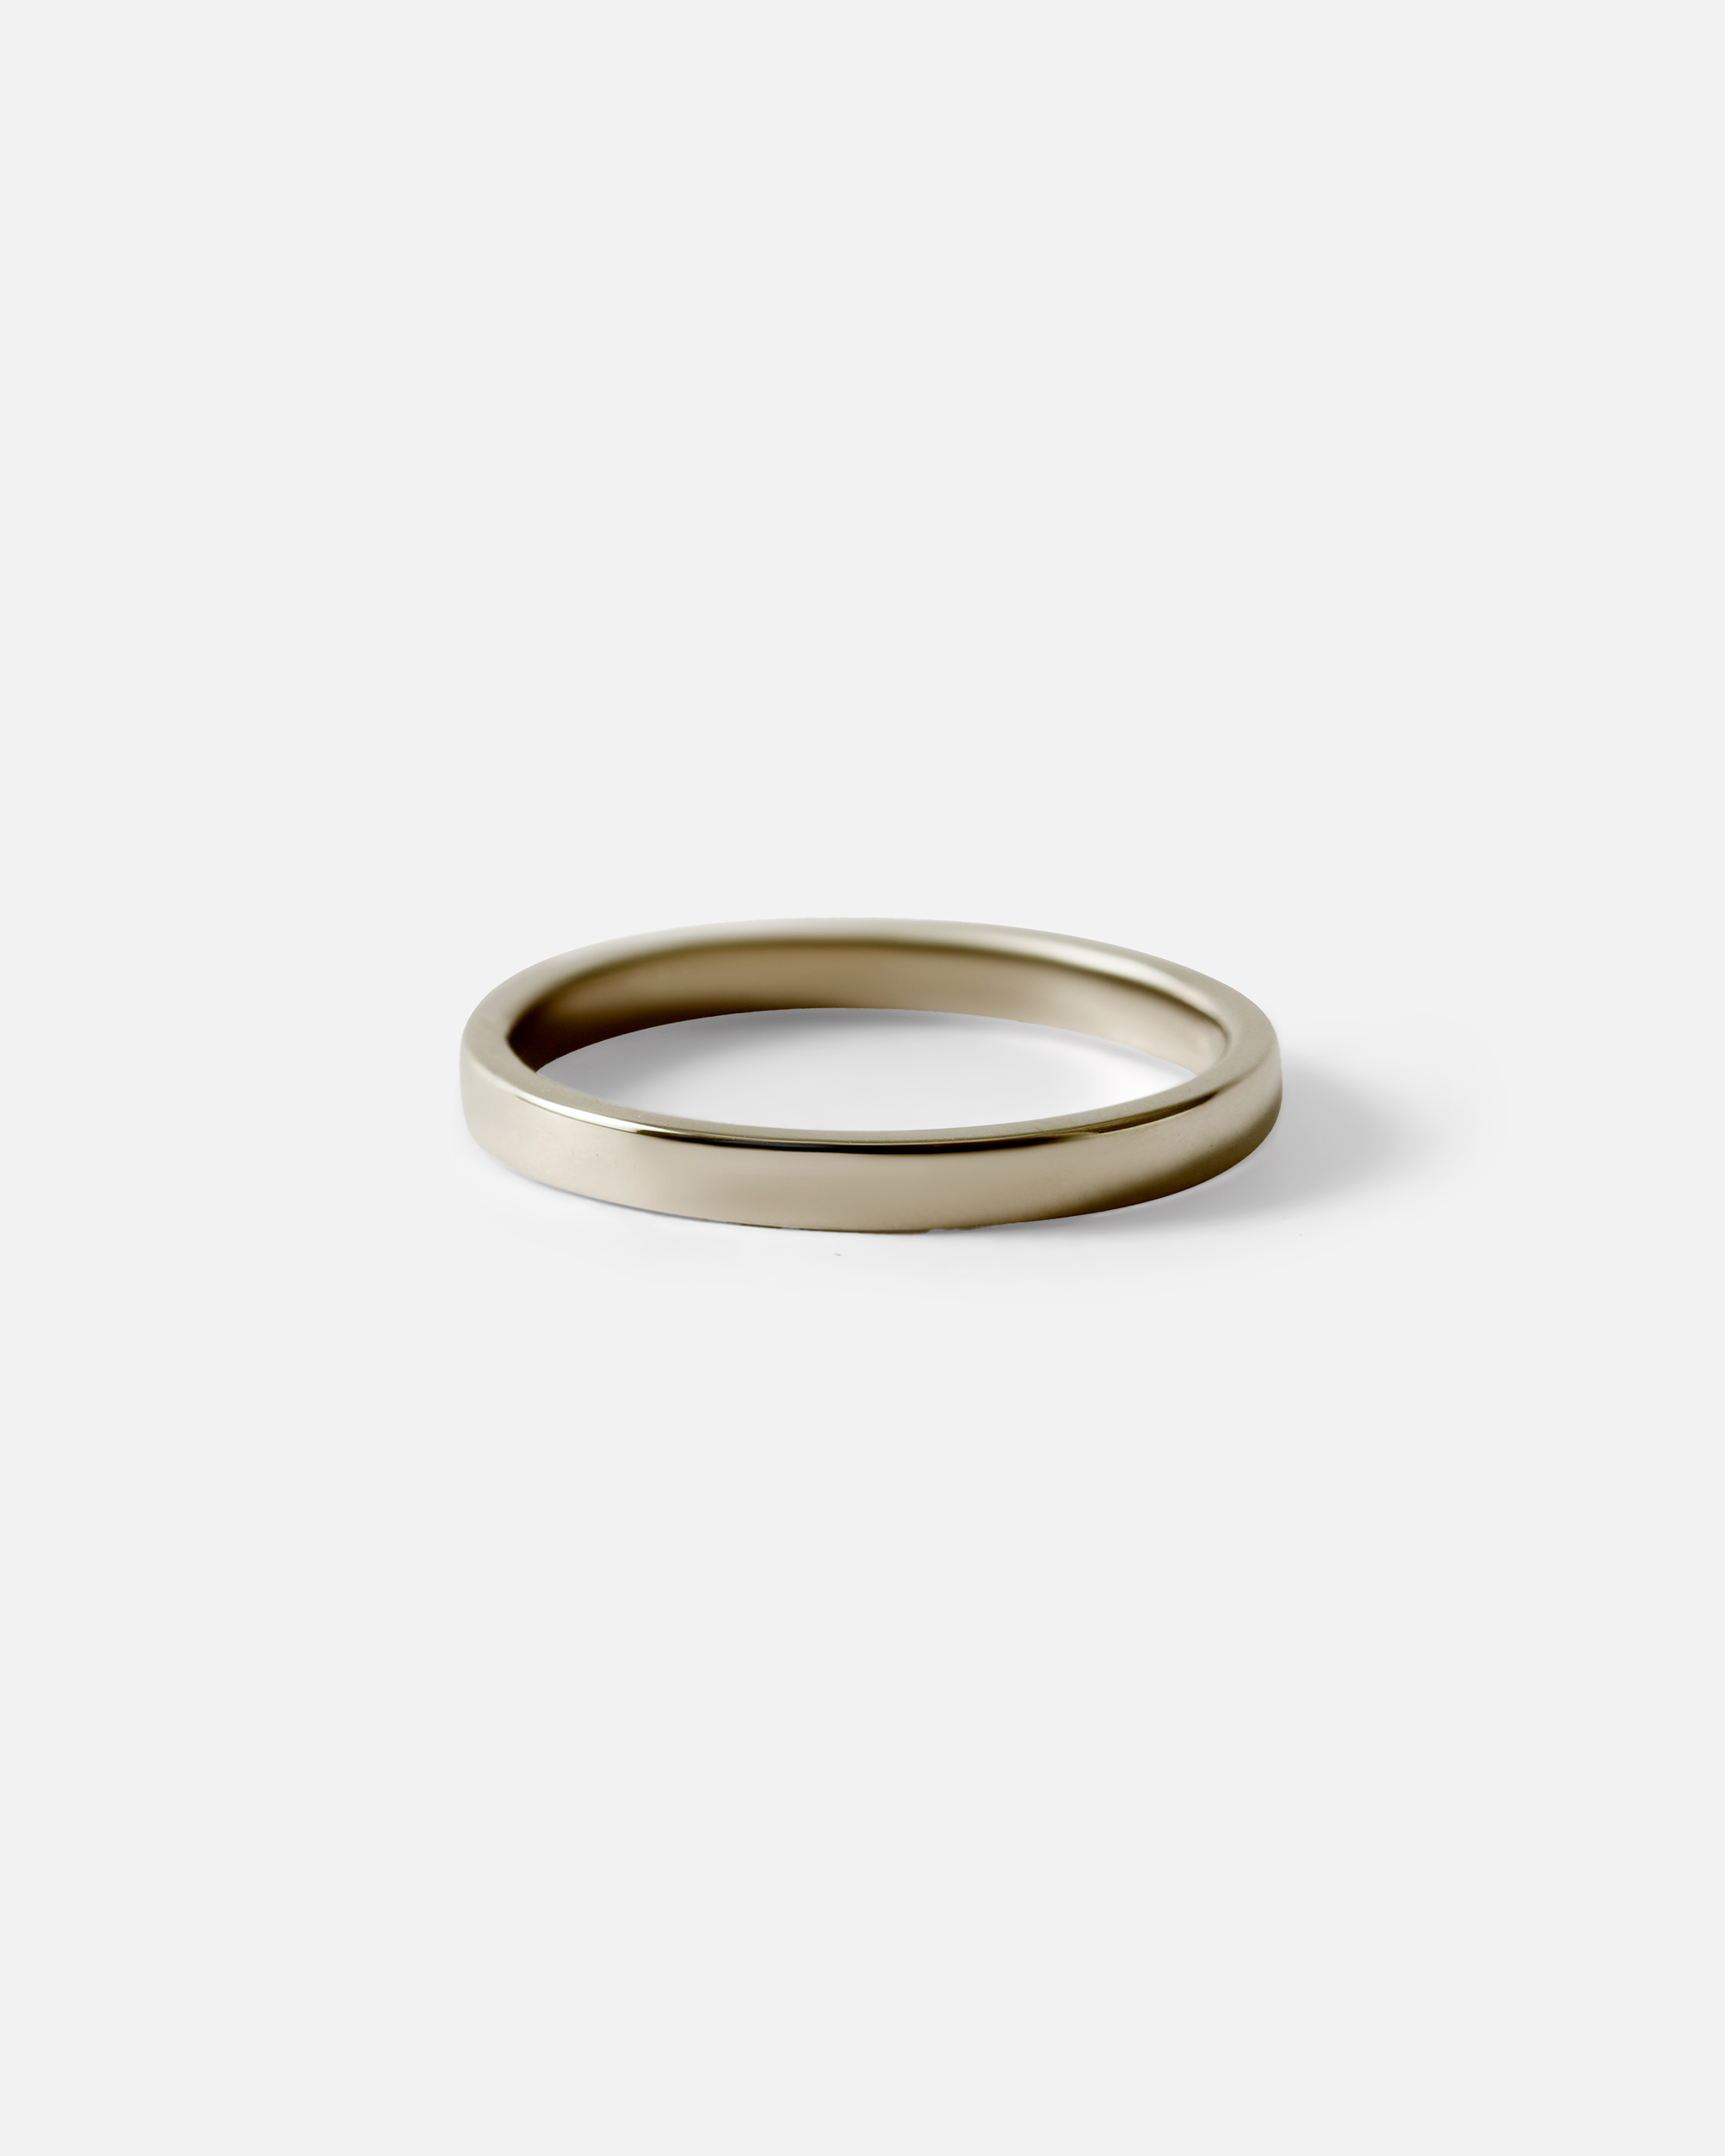 Angled view of Flat Band / 2mm Customizable By Hiroyo in 14k white gold